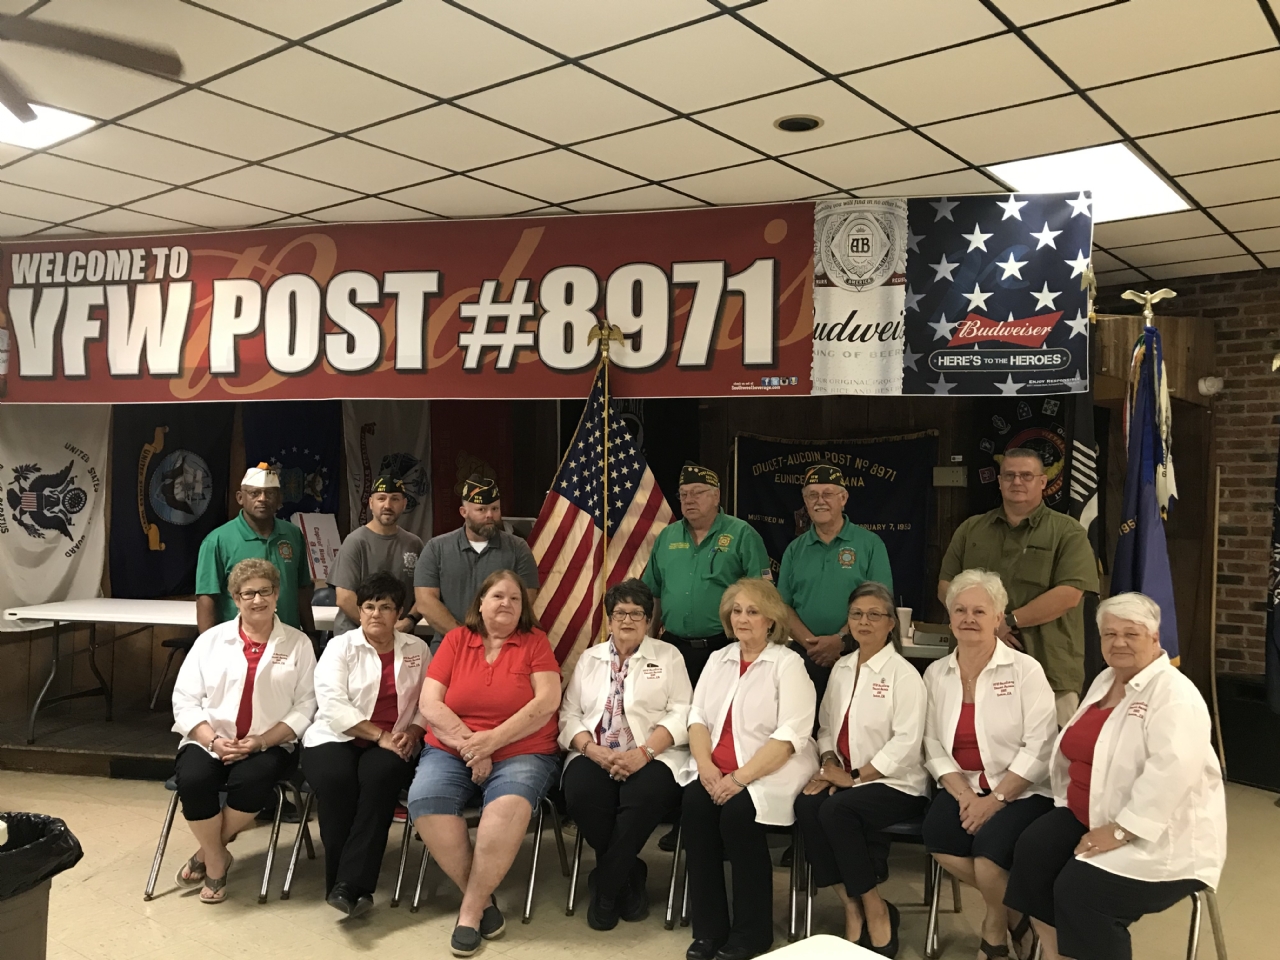 The 2019-2020 Officers
Donald Reber is the Post Commander
Linda Thibodeaux is the Auxiliary President